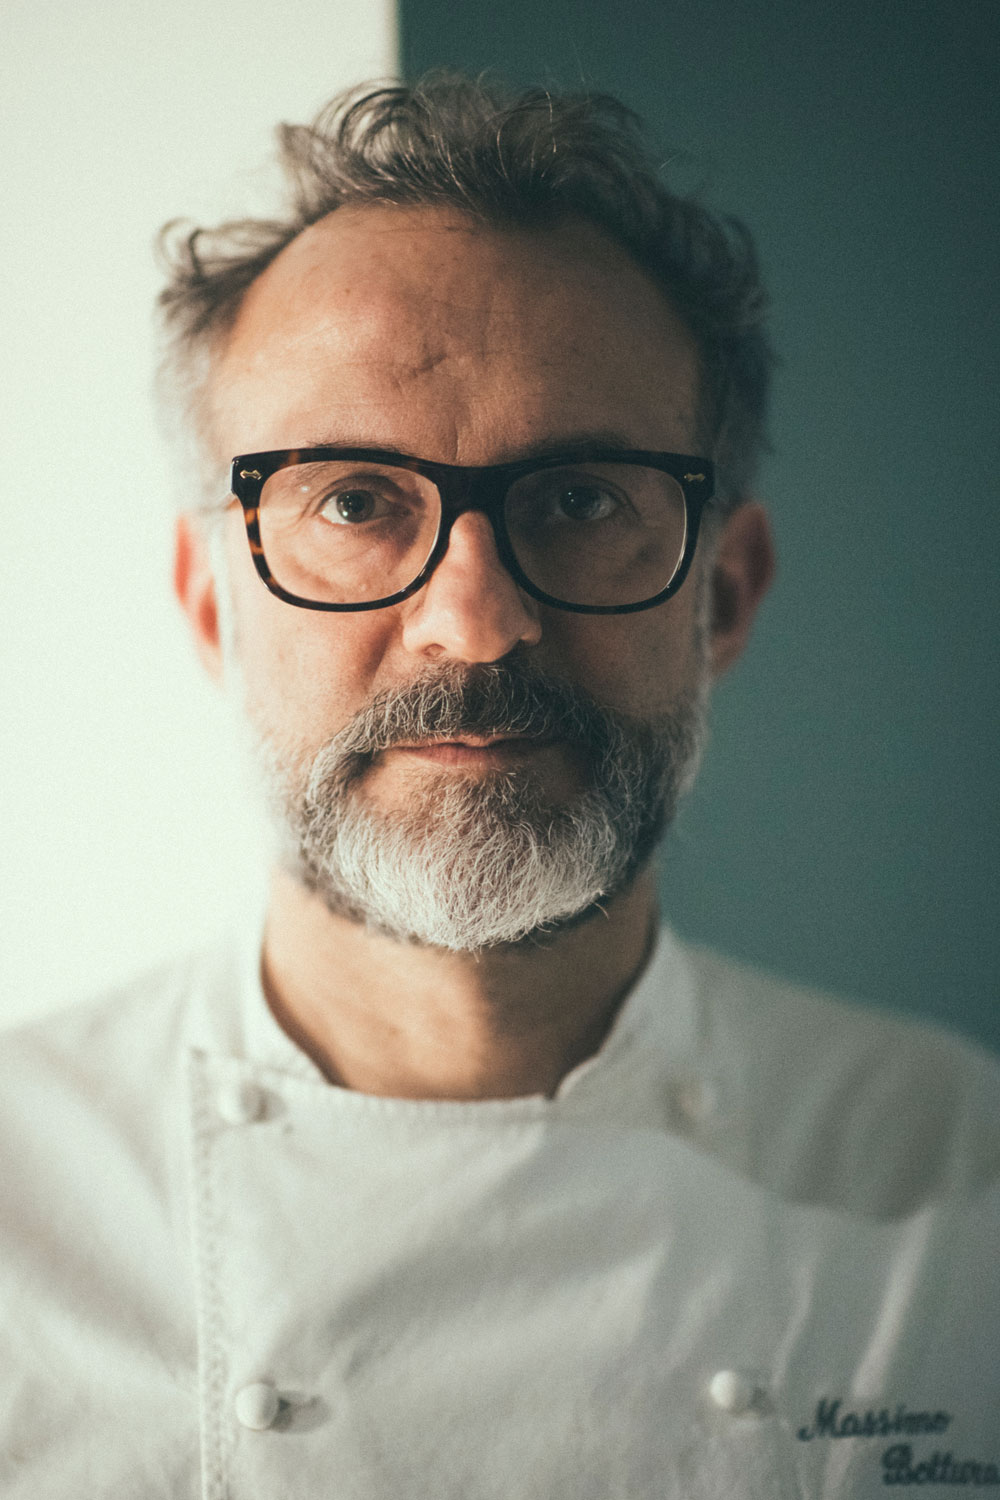 Massimo Bottura: ‘It’s important that chefs are also activists’